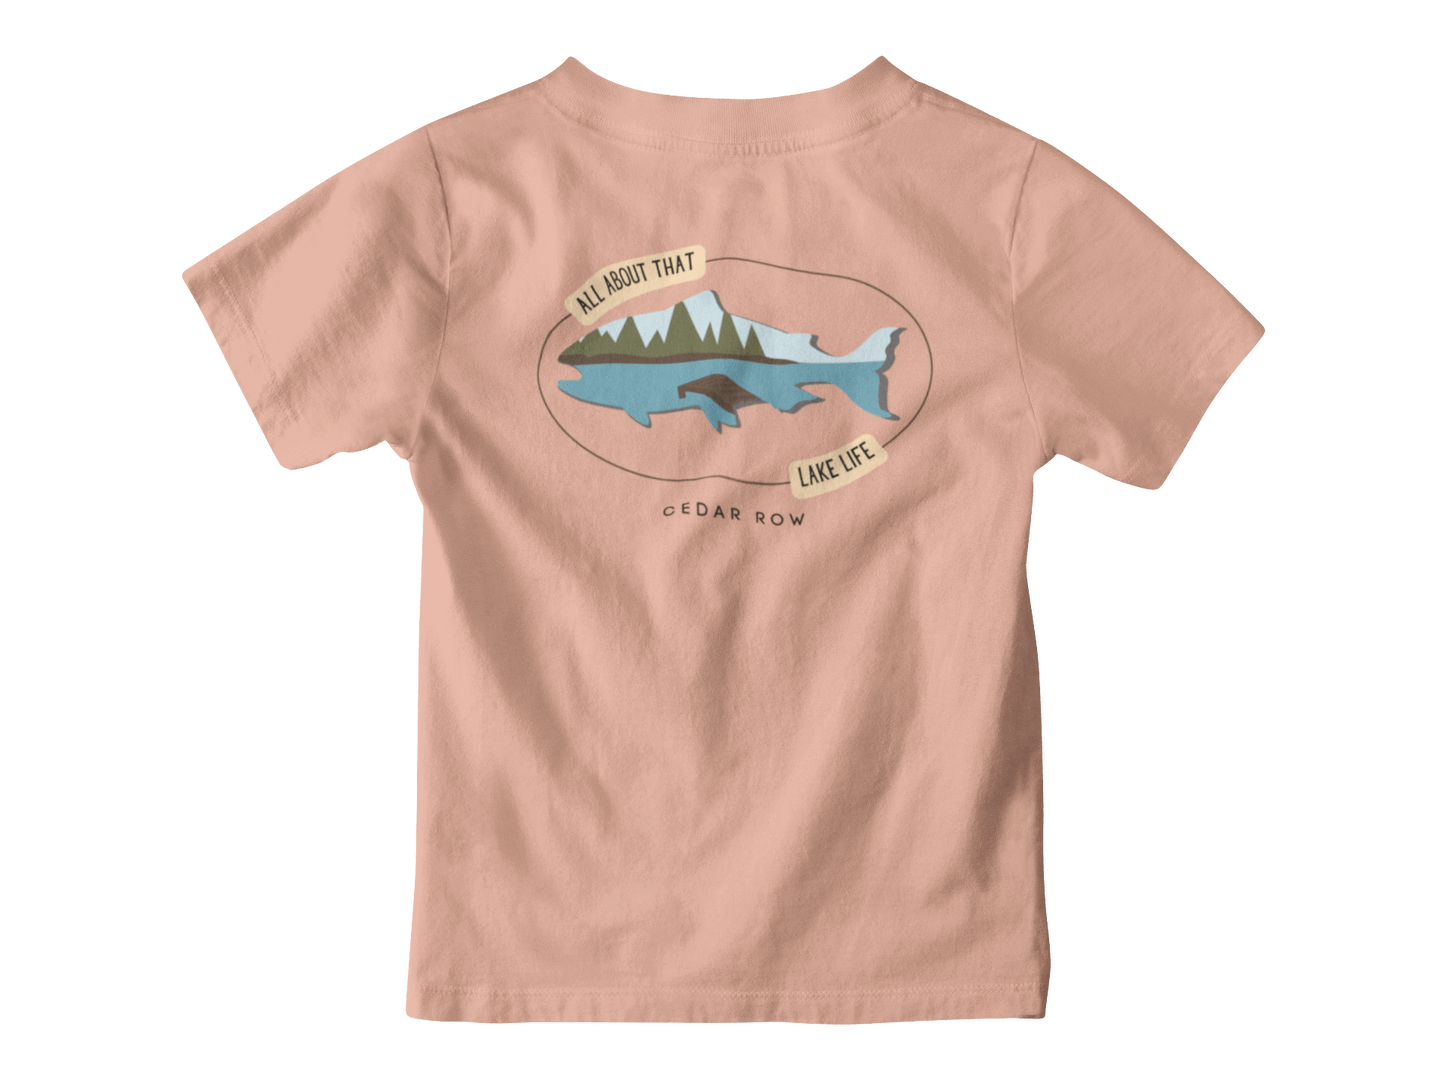 Kids-All About That Lake Life Tee